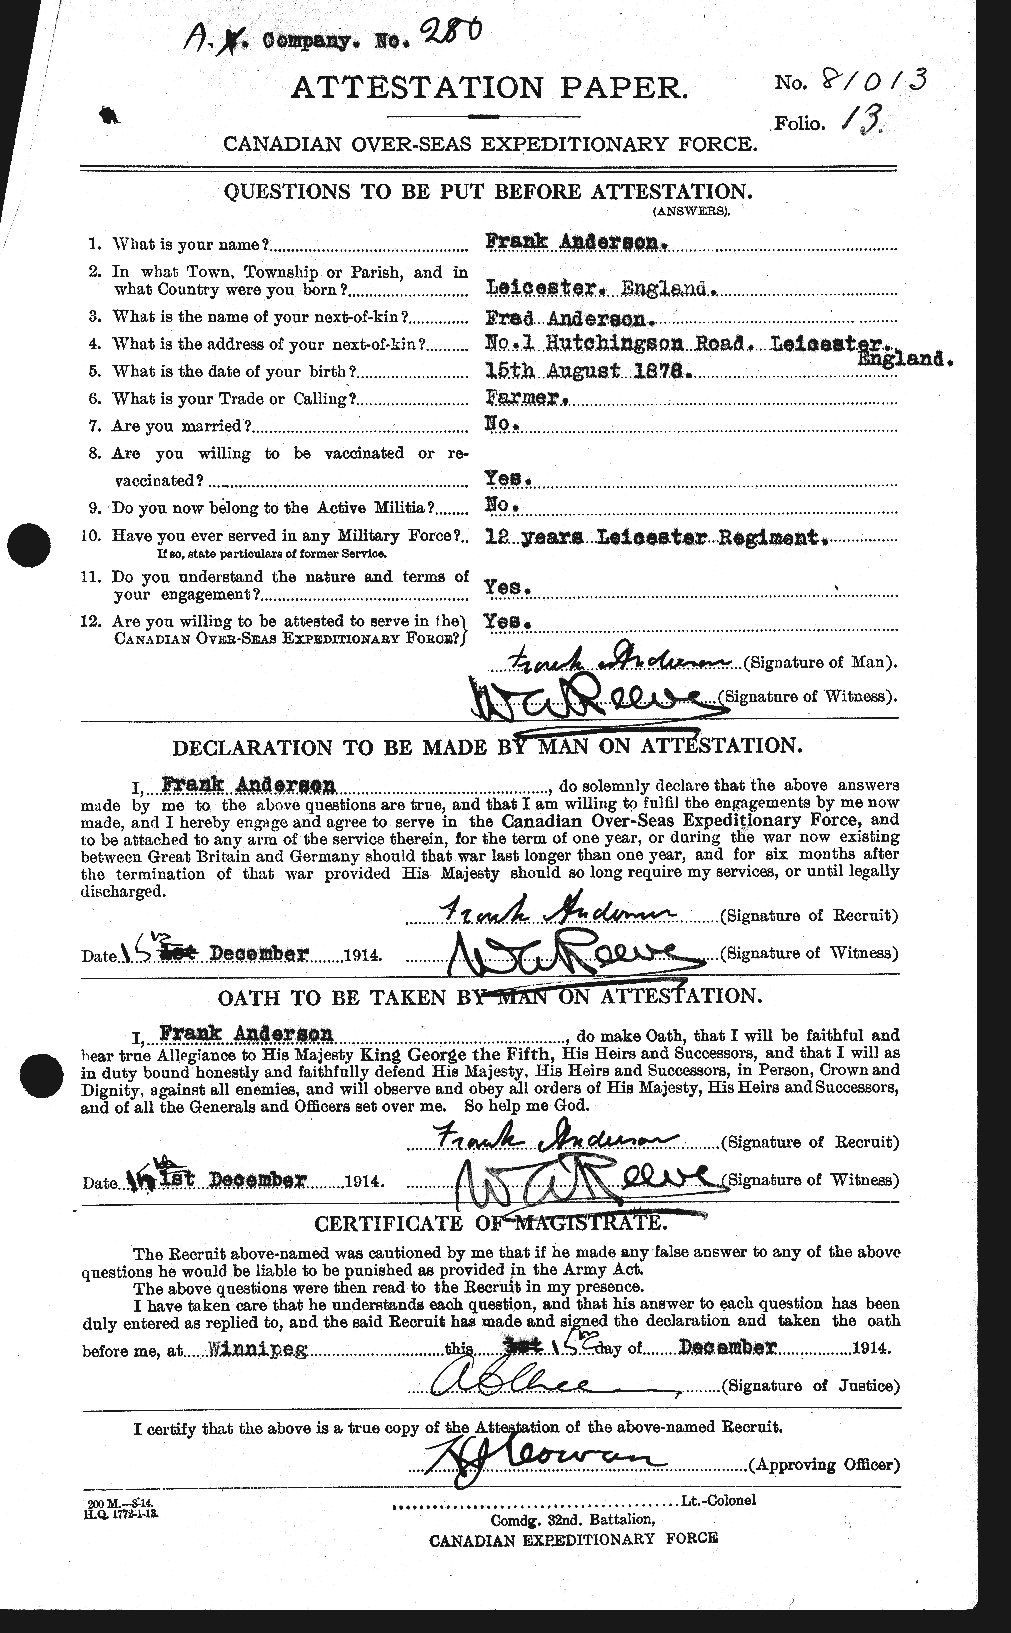 Personnel Records of the First World War - CEF 209854a